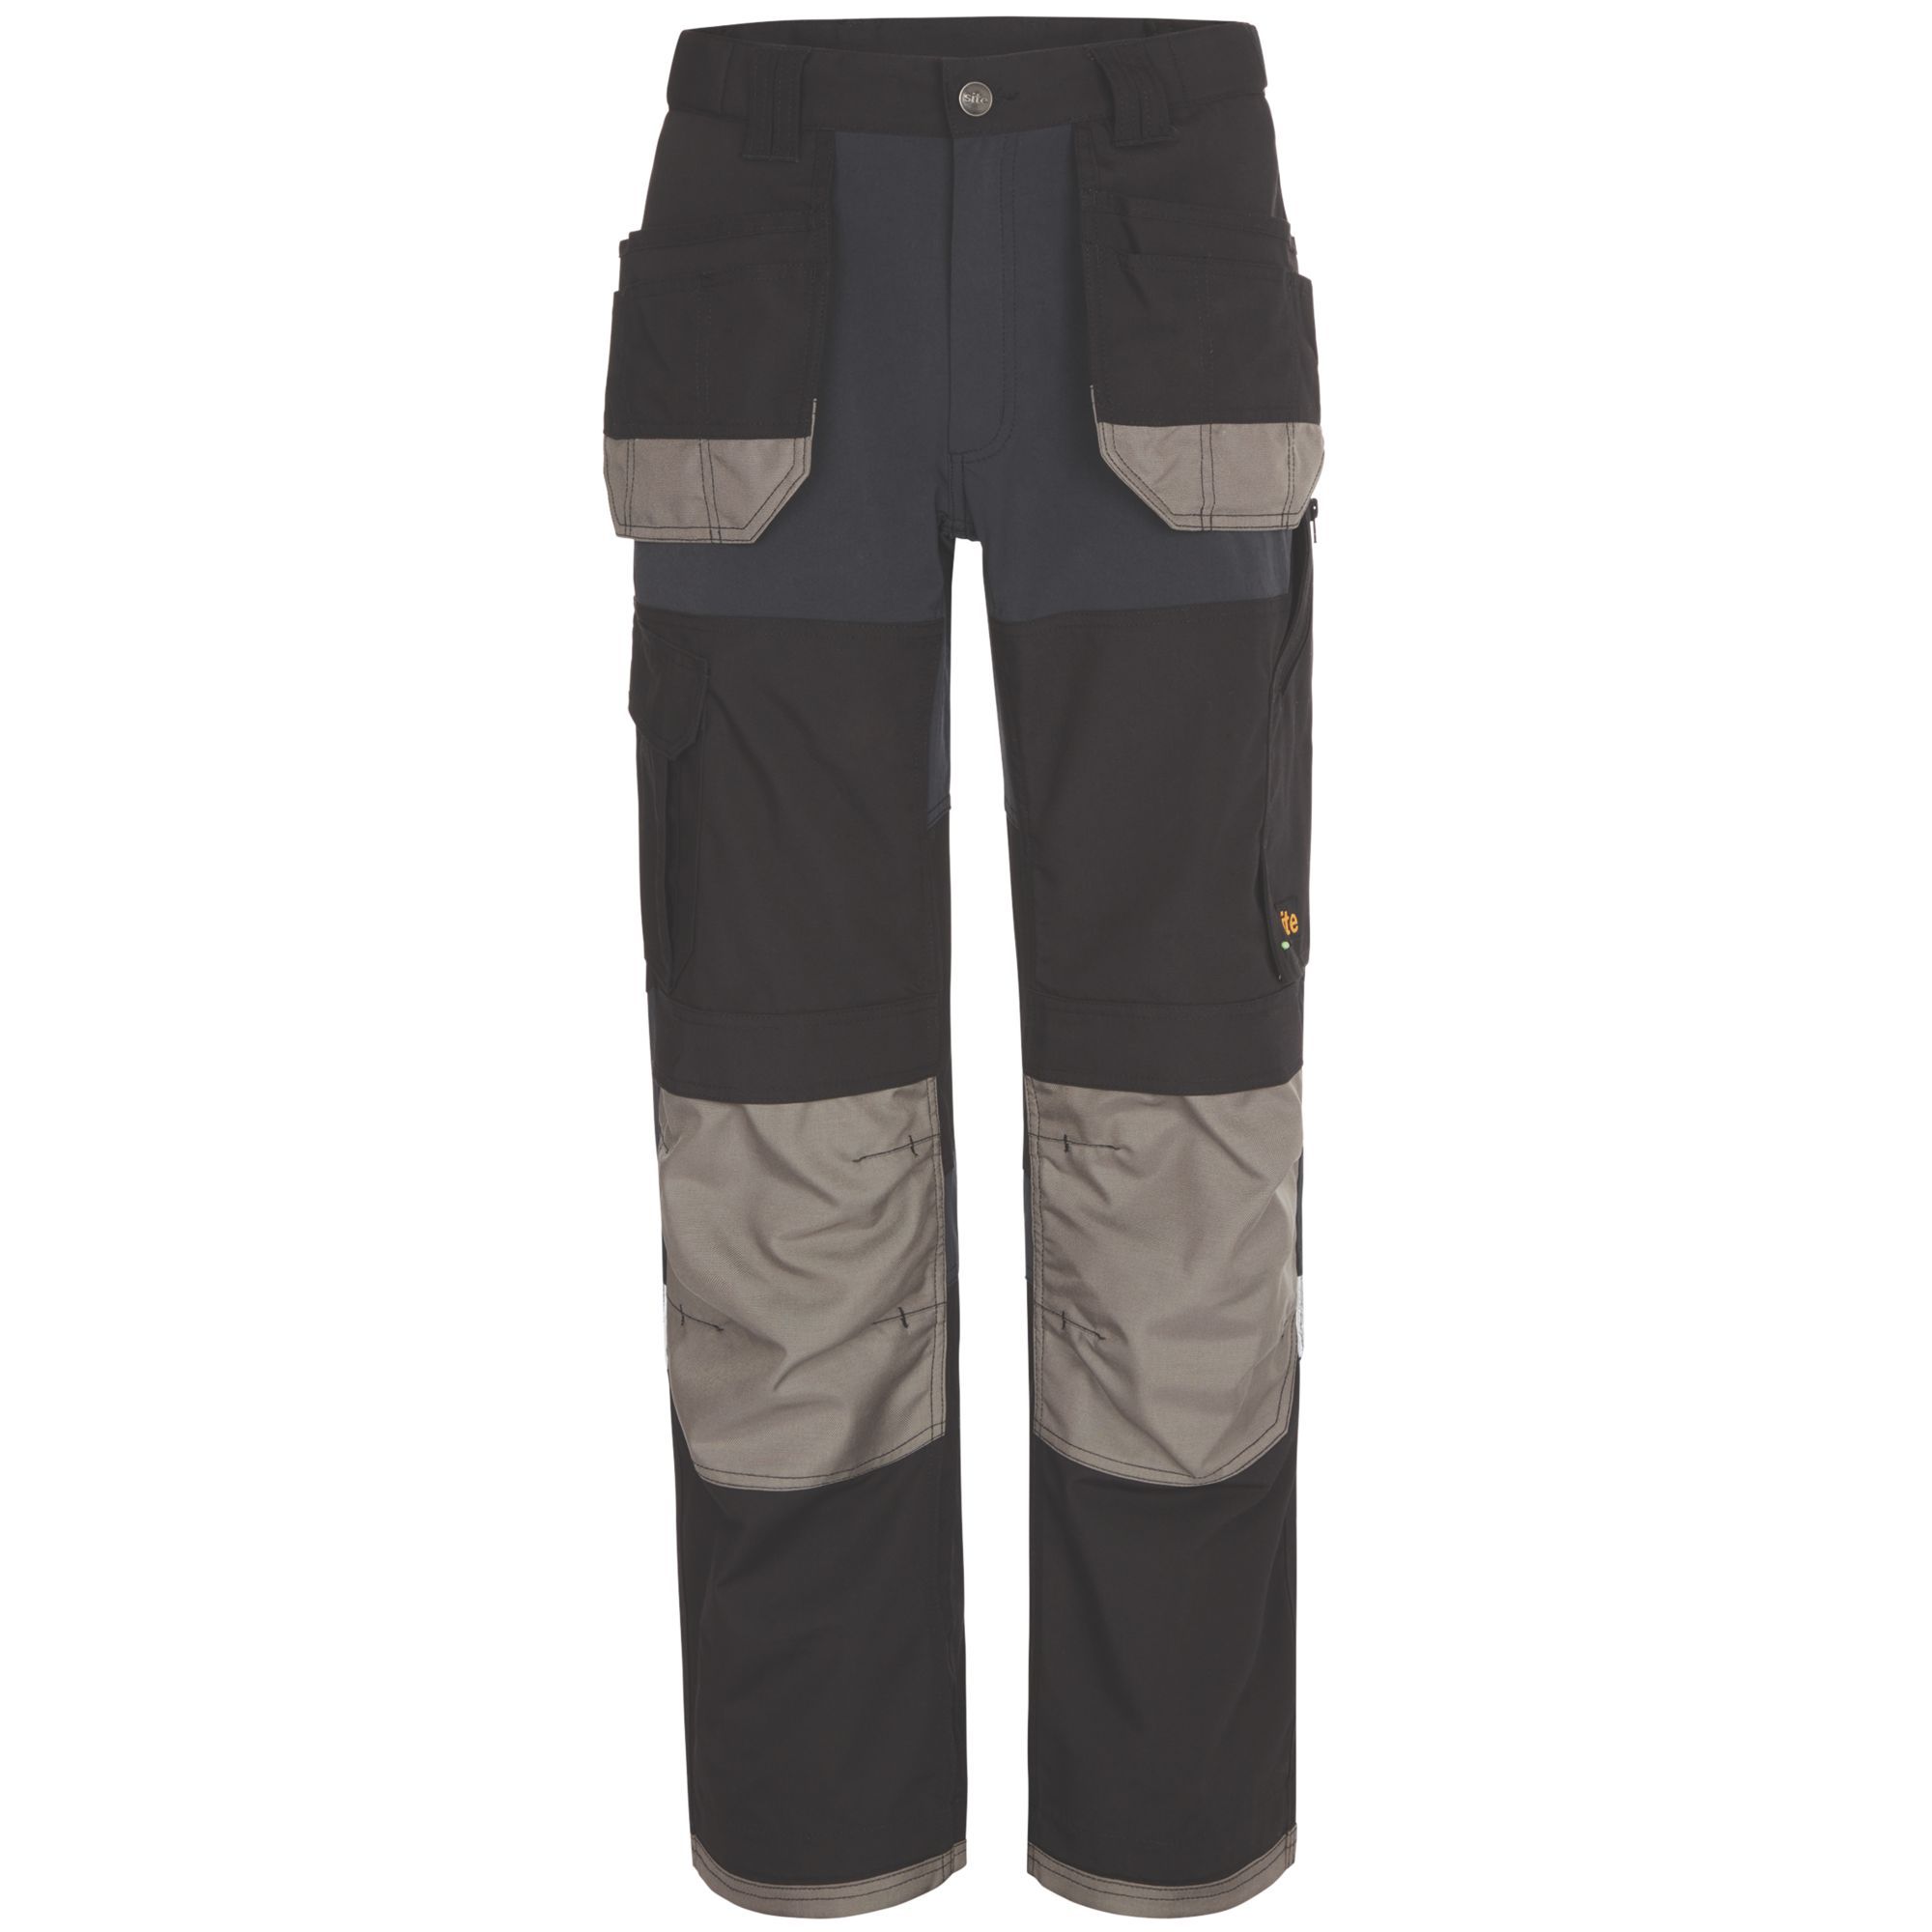 Site Chinook Black & Grey Men's Holster Pocket Trousers, W34" L32"